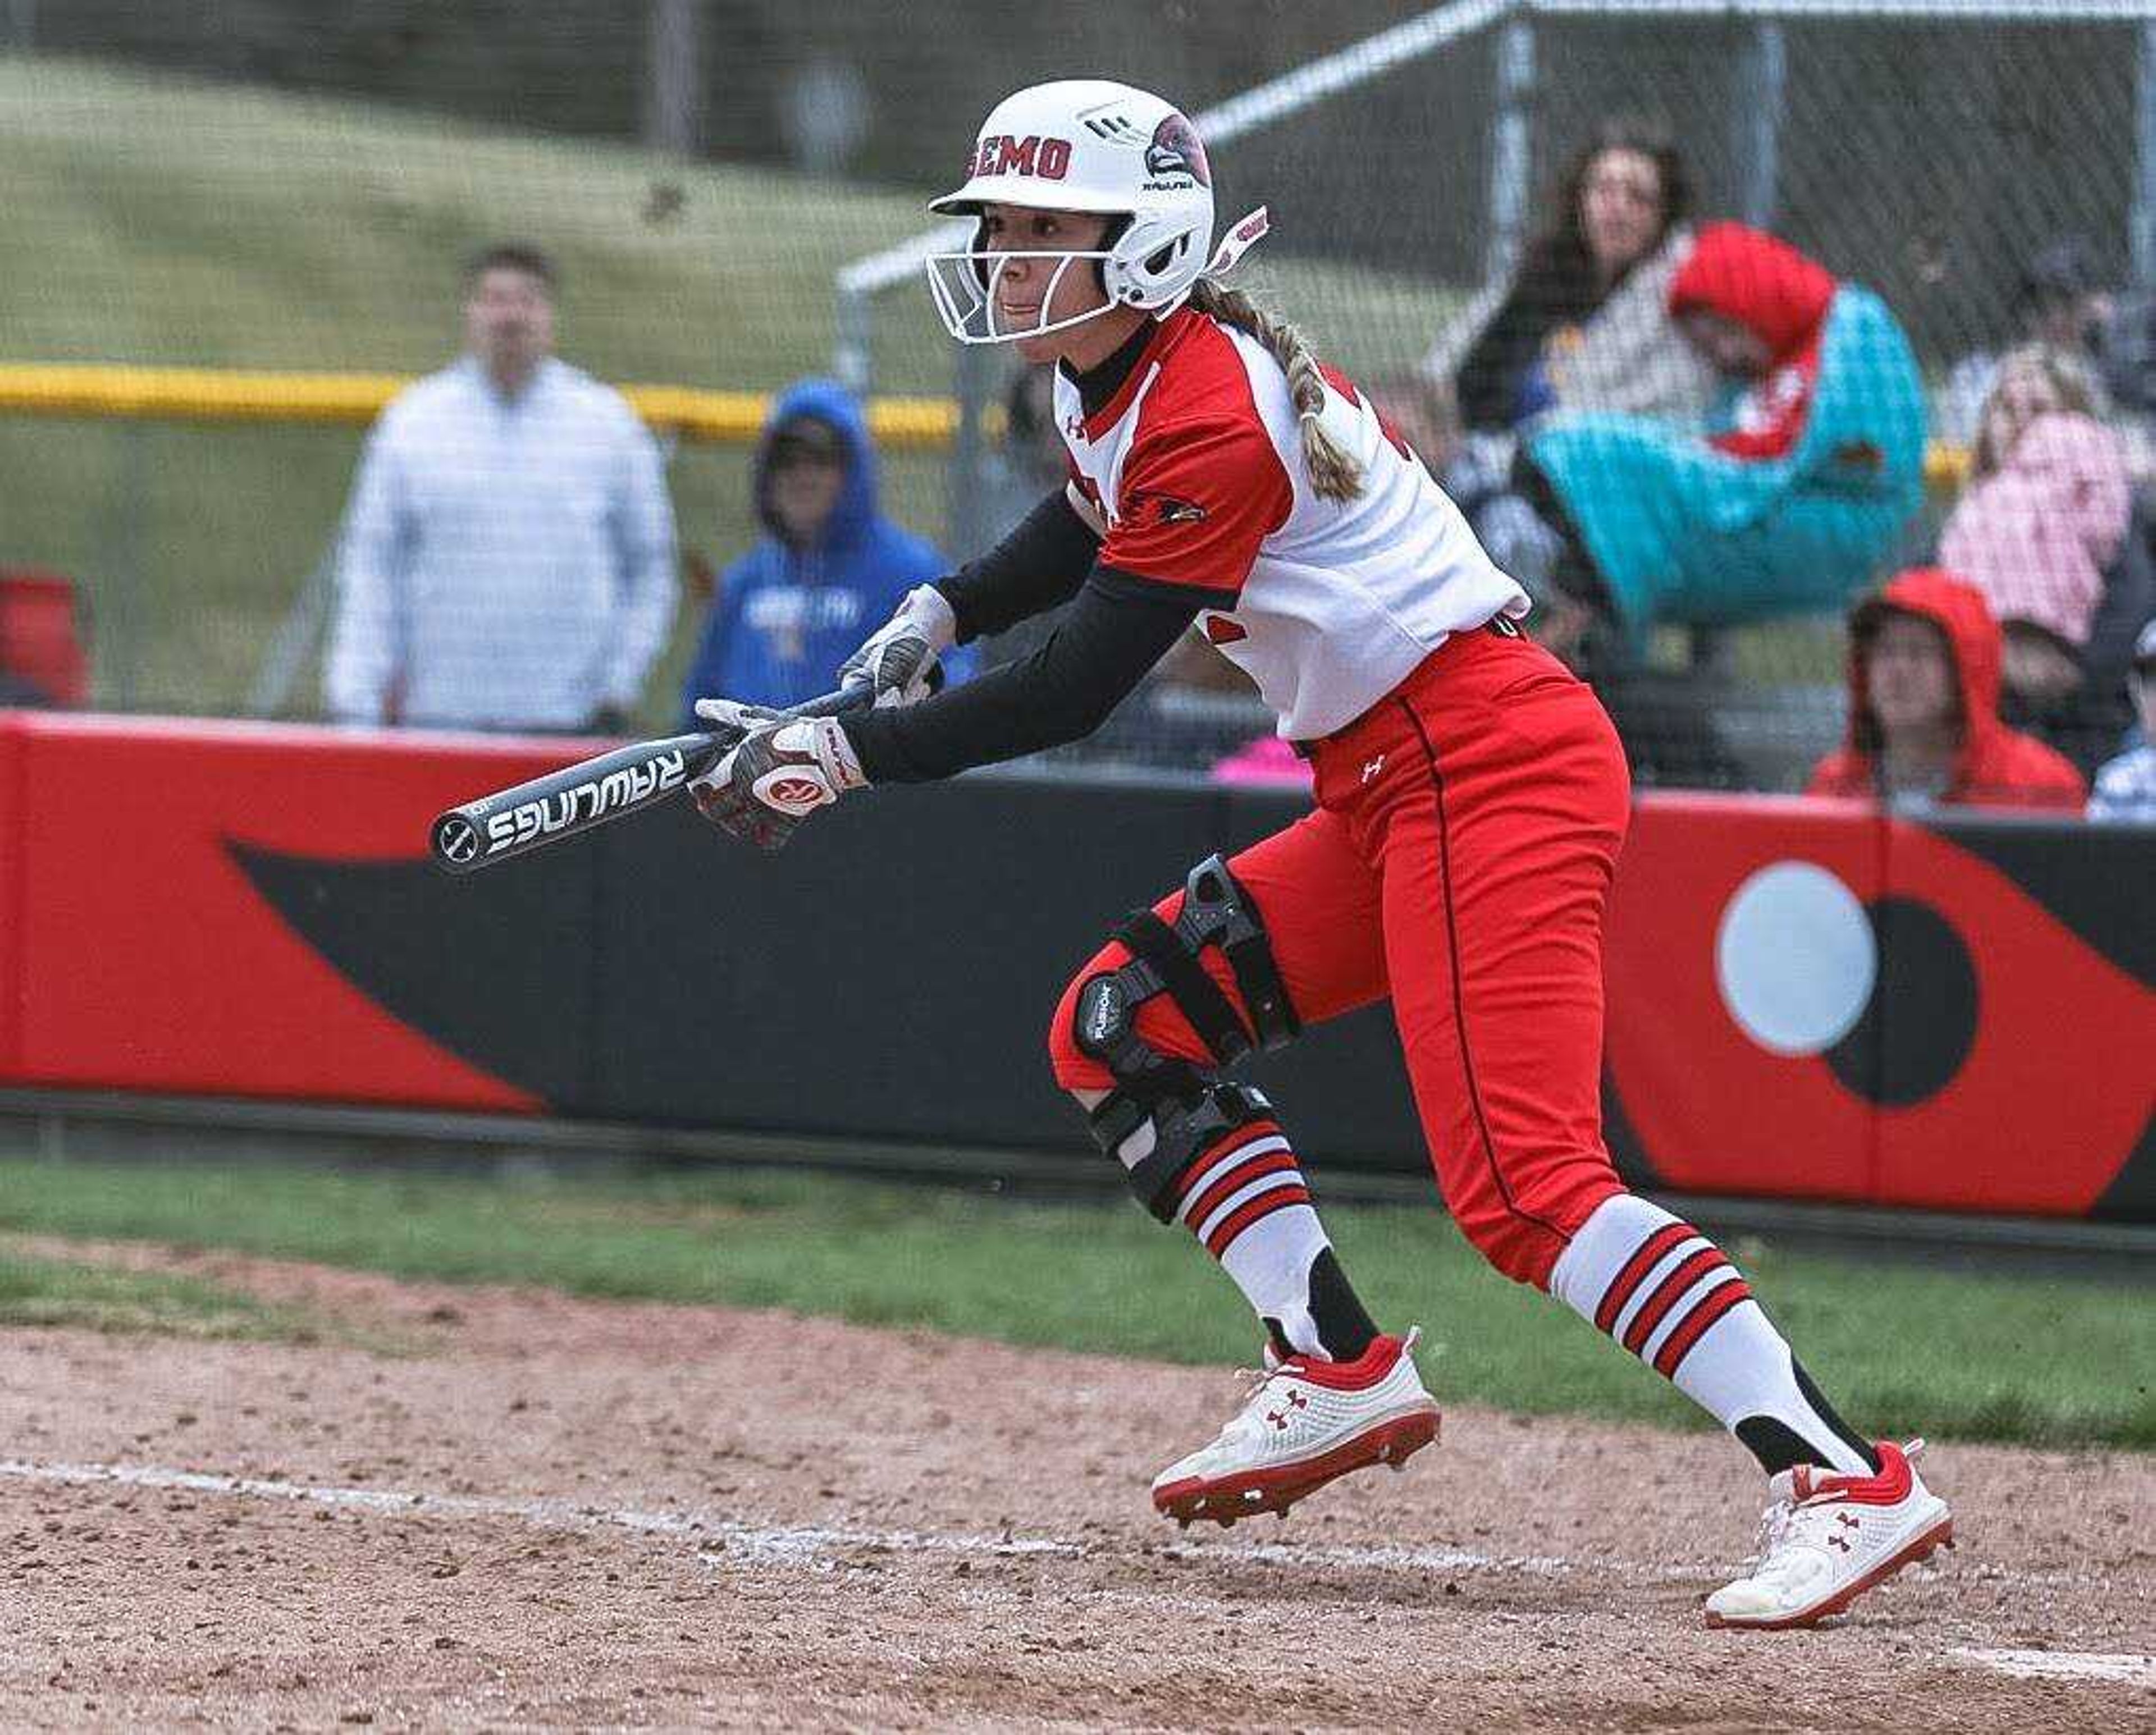 Freshman Kimmy Wallen bunting to advance a Redhawk from First base to Second. March 1, 2020